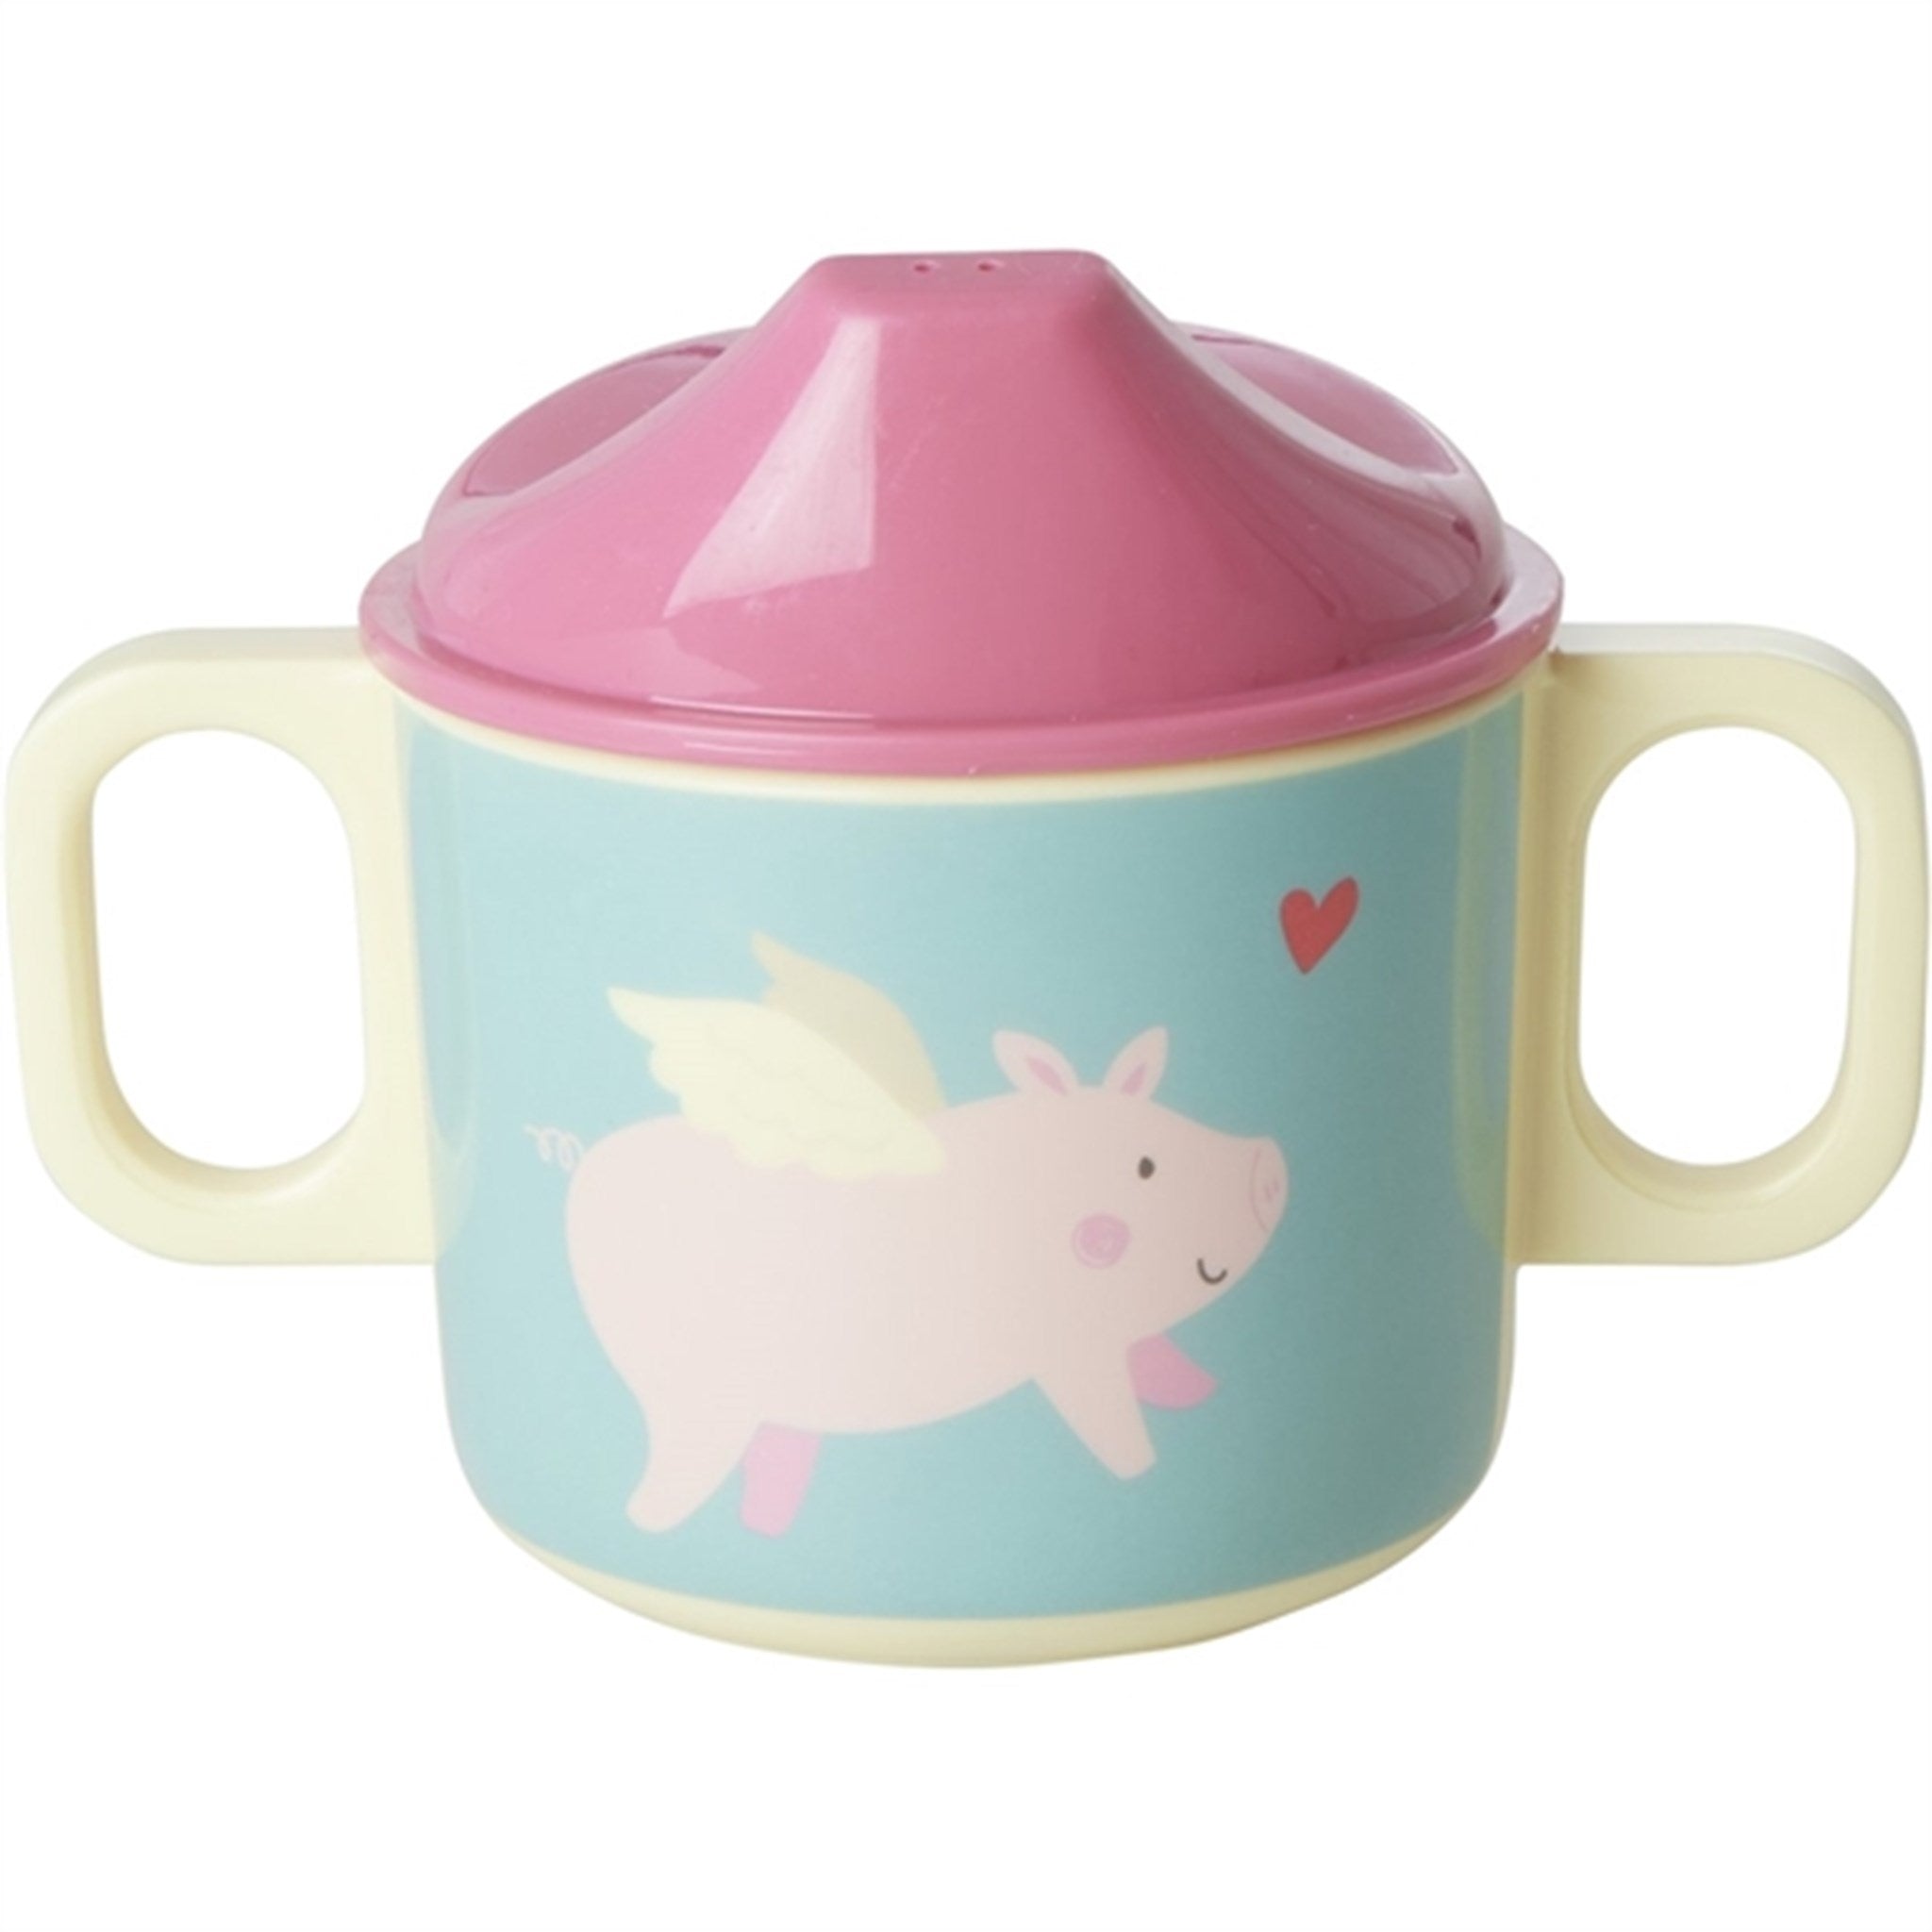 RICE Flying Pig Melamine Baby Cup with Handles